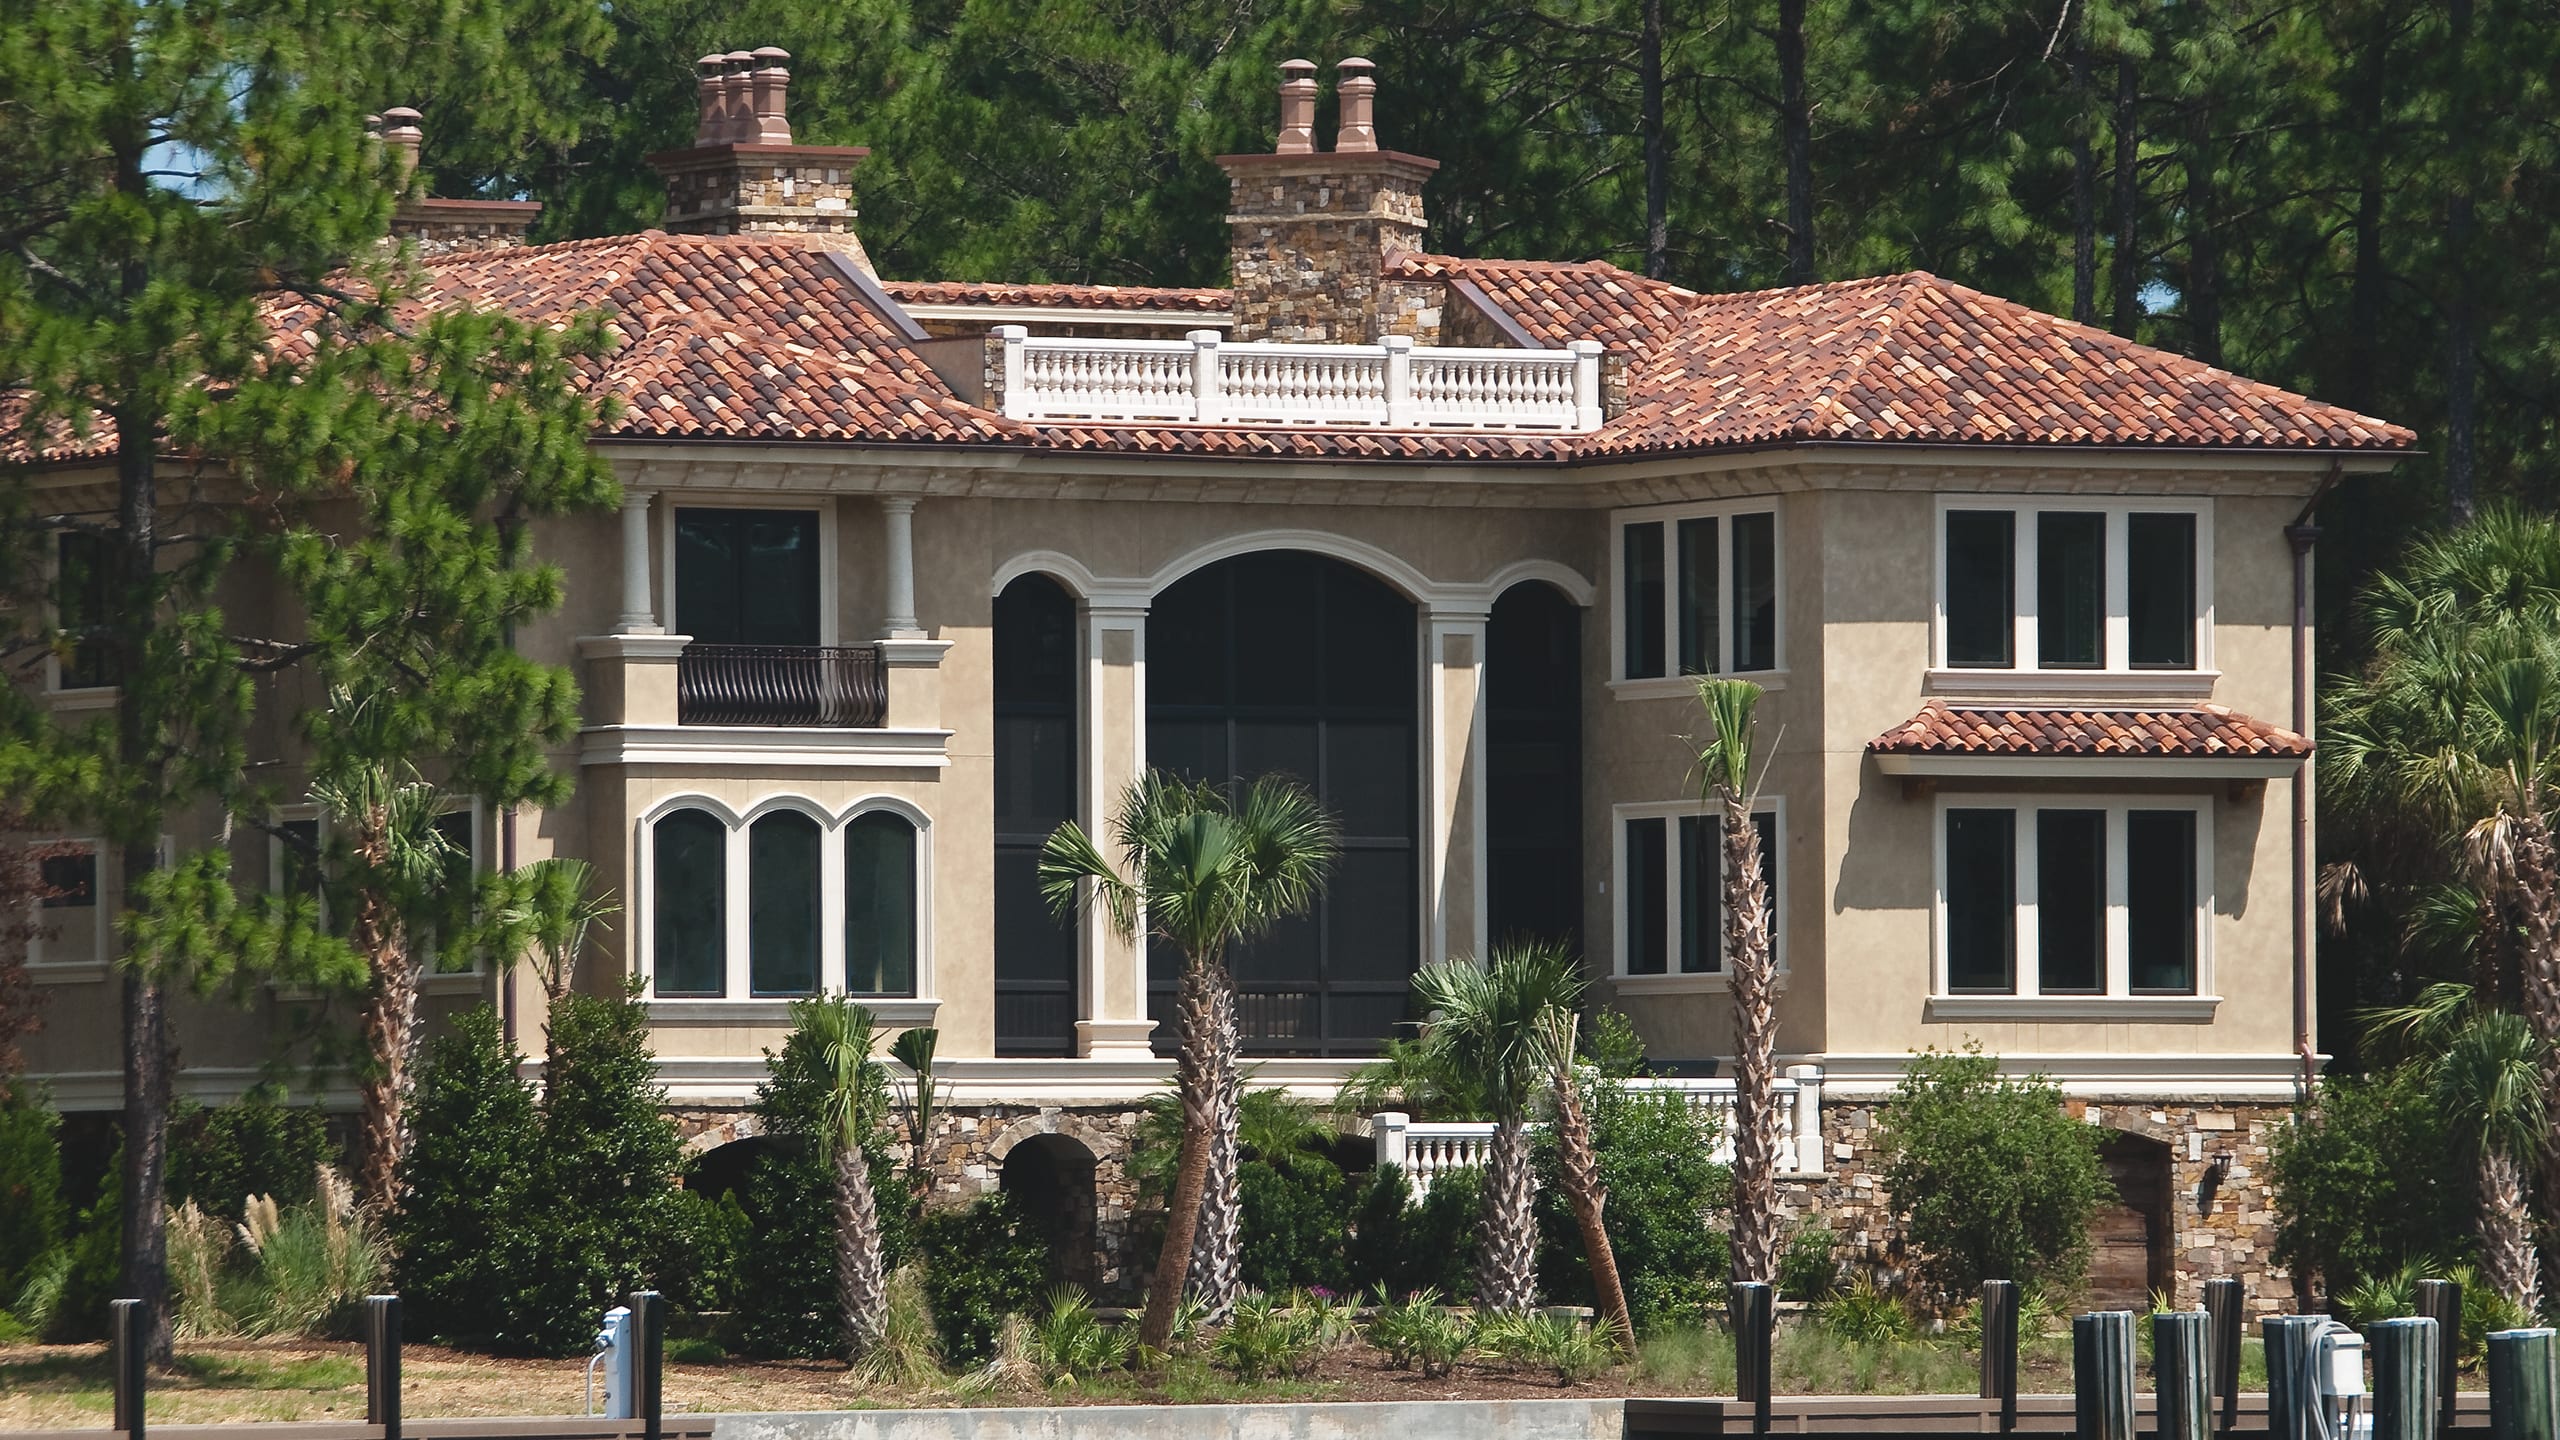 Private Residence - Hilton Head Ludowici Roof Tile